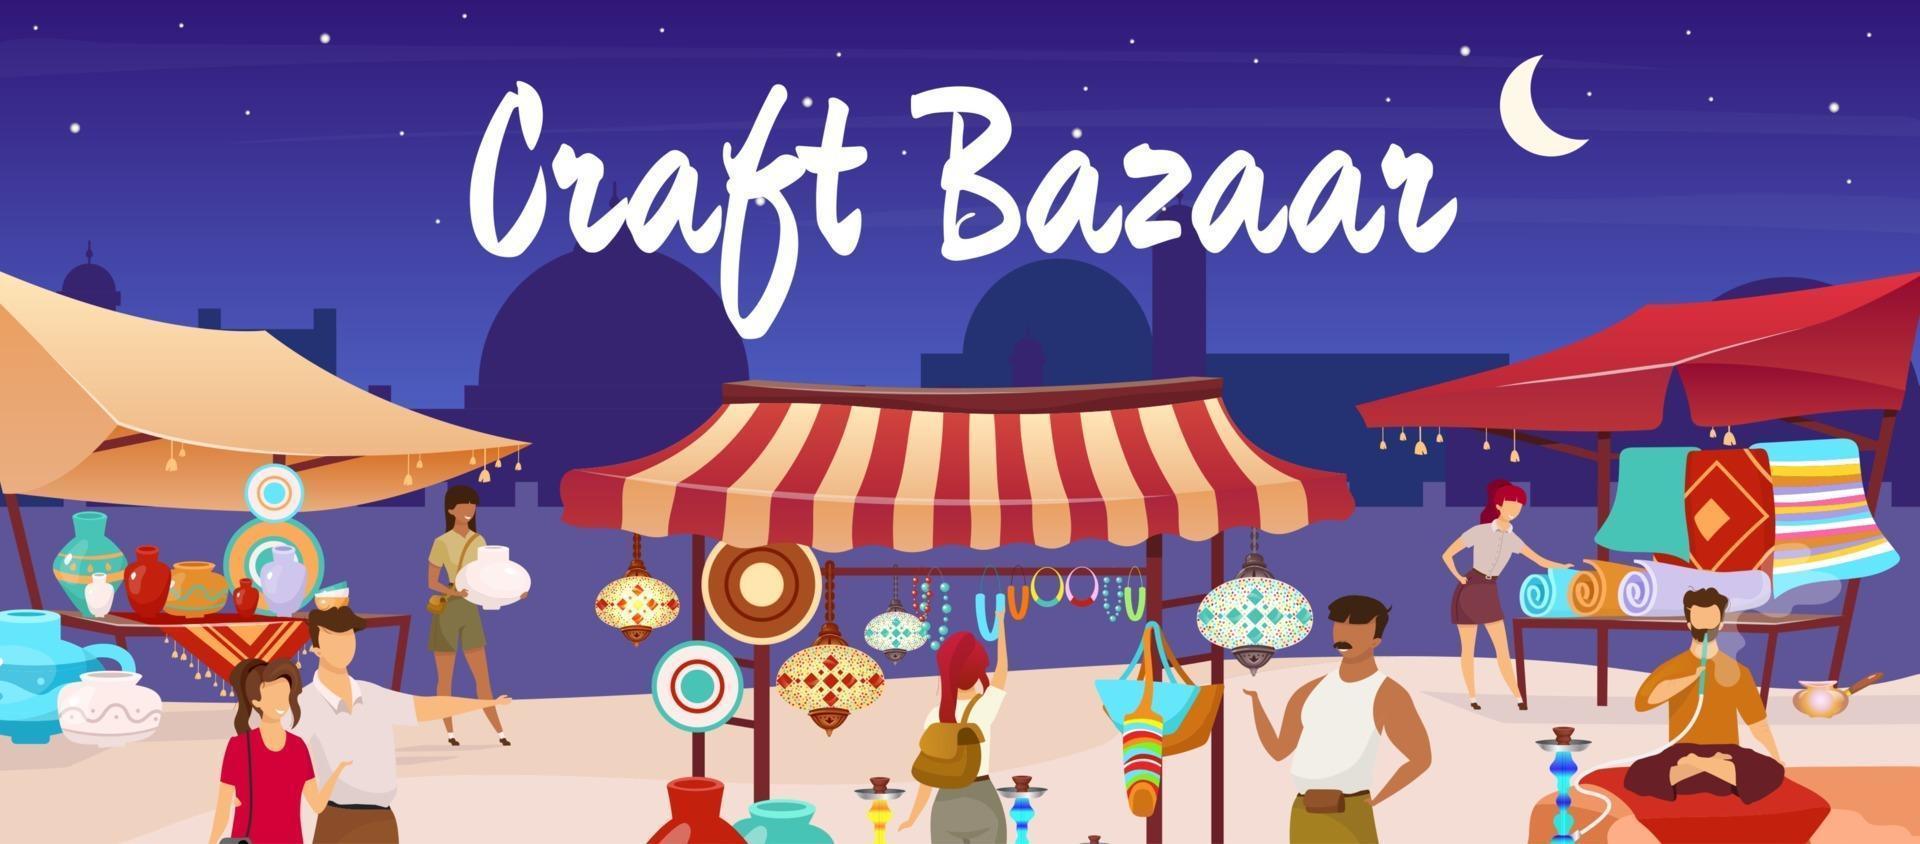 Craft bazaar flat color vector illustration. Egypt marketplace. Eastern market with souvenirs, carpets, pottery for tourist. Travelers, sellers cartoon characters with trade tents on background